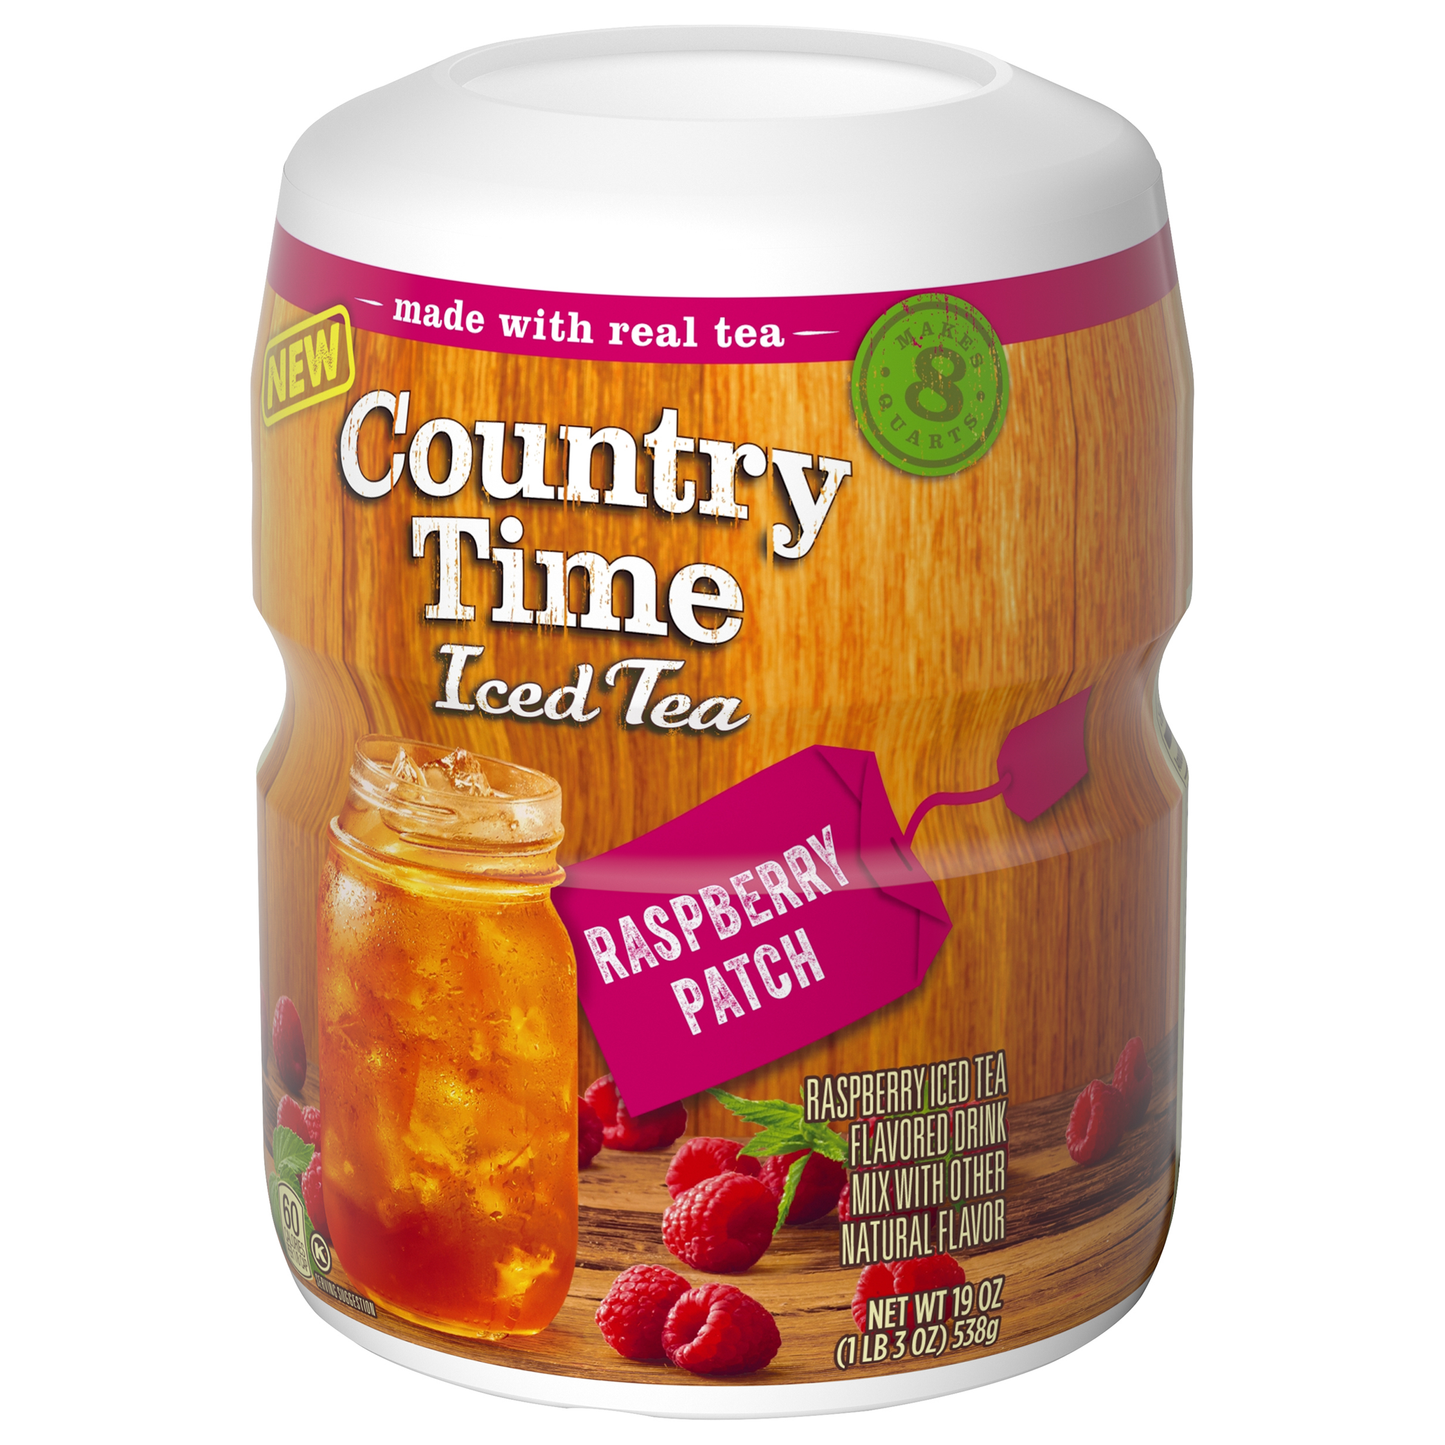 Country Time Iced Tea Raspberry Patch Drink Mix 538g sold by American grocer Uk